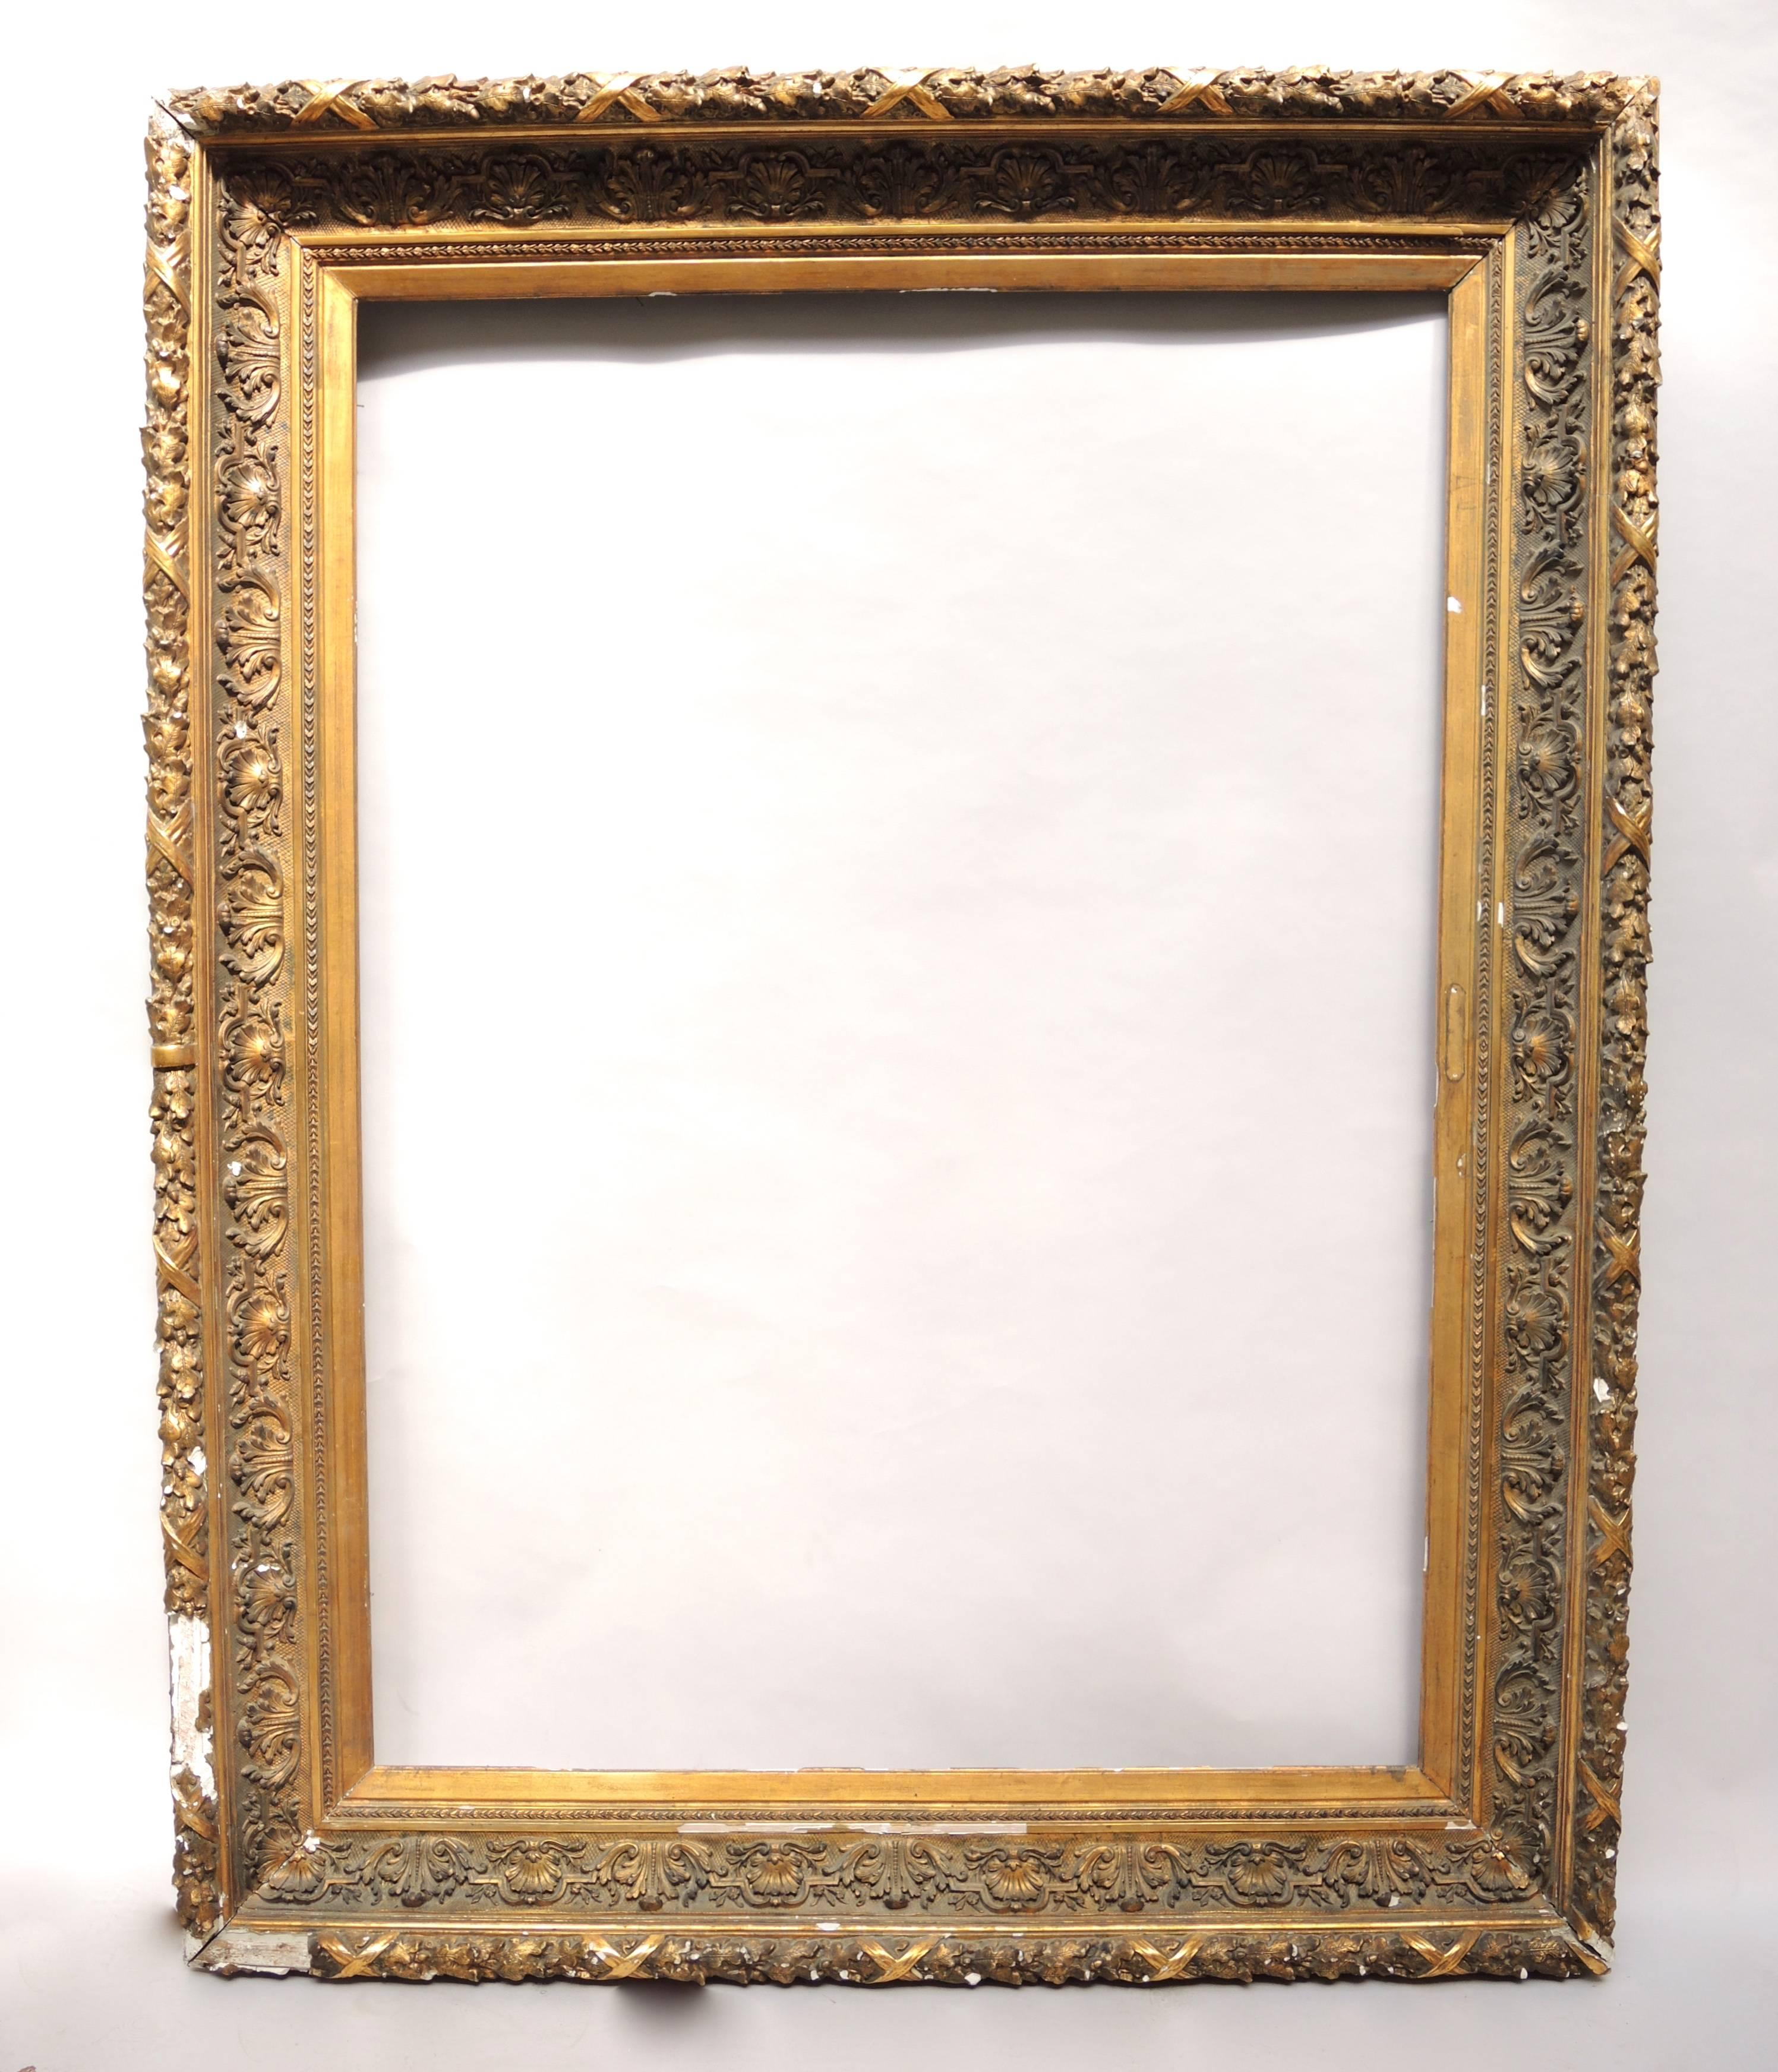 This huge 19th century painting frame is the epitome of old world chic with its detailed design and age worn surface. The heavy wood frame is adorned on the outer edge with gilt gesso garlands of oak leaves with acorns and on the inner edge with